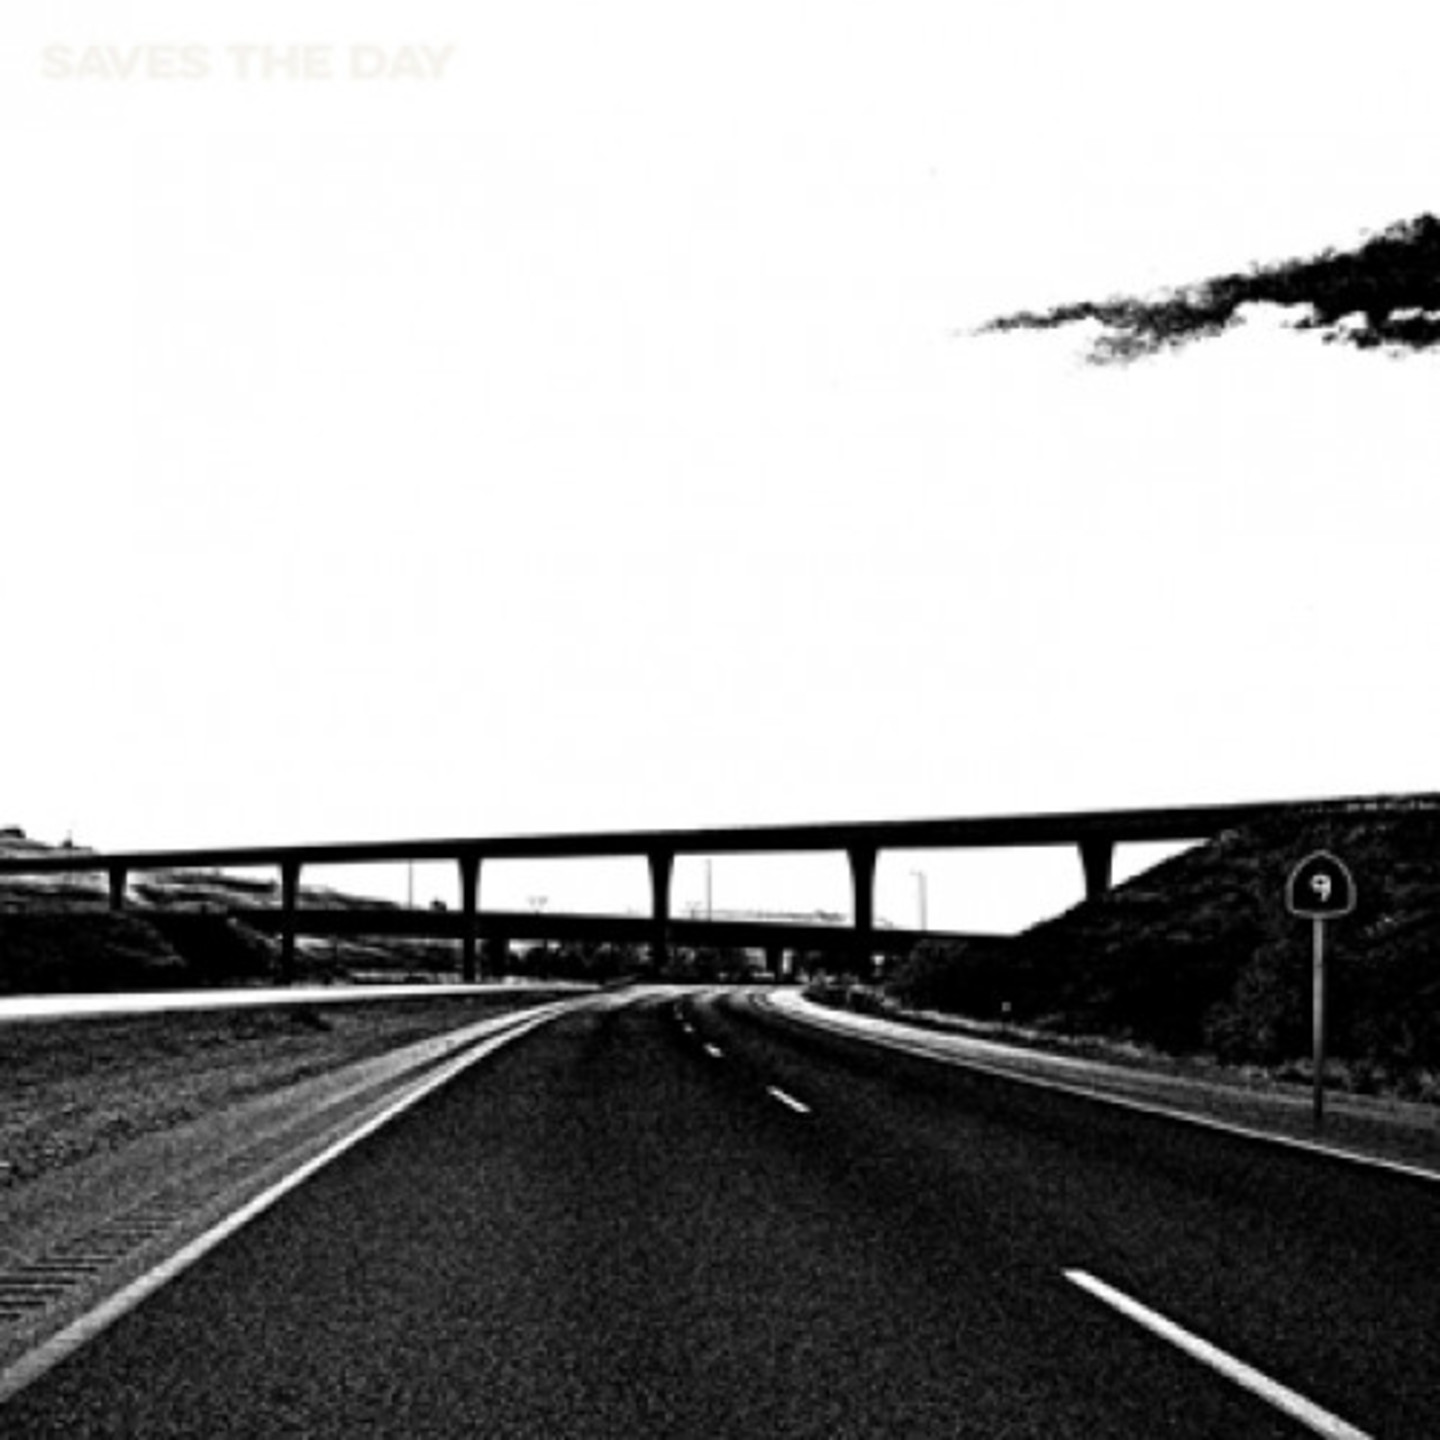 SAVES THE DAY - 9 LP